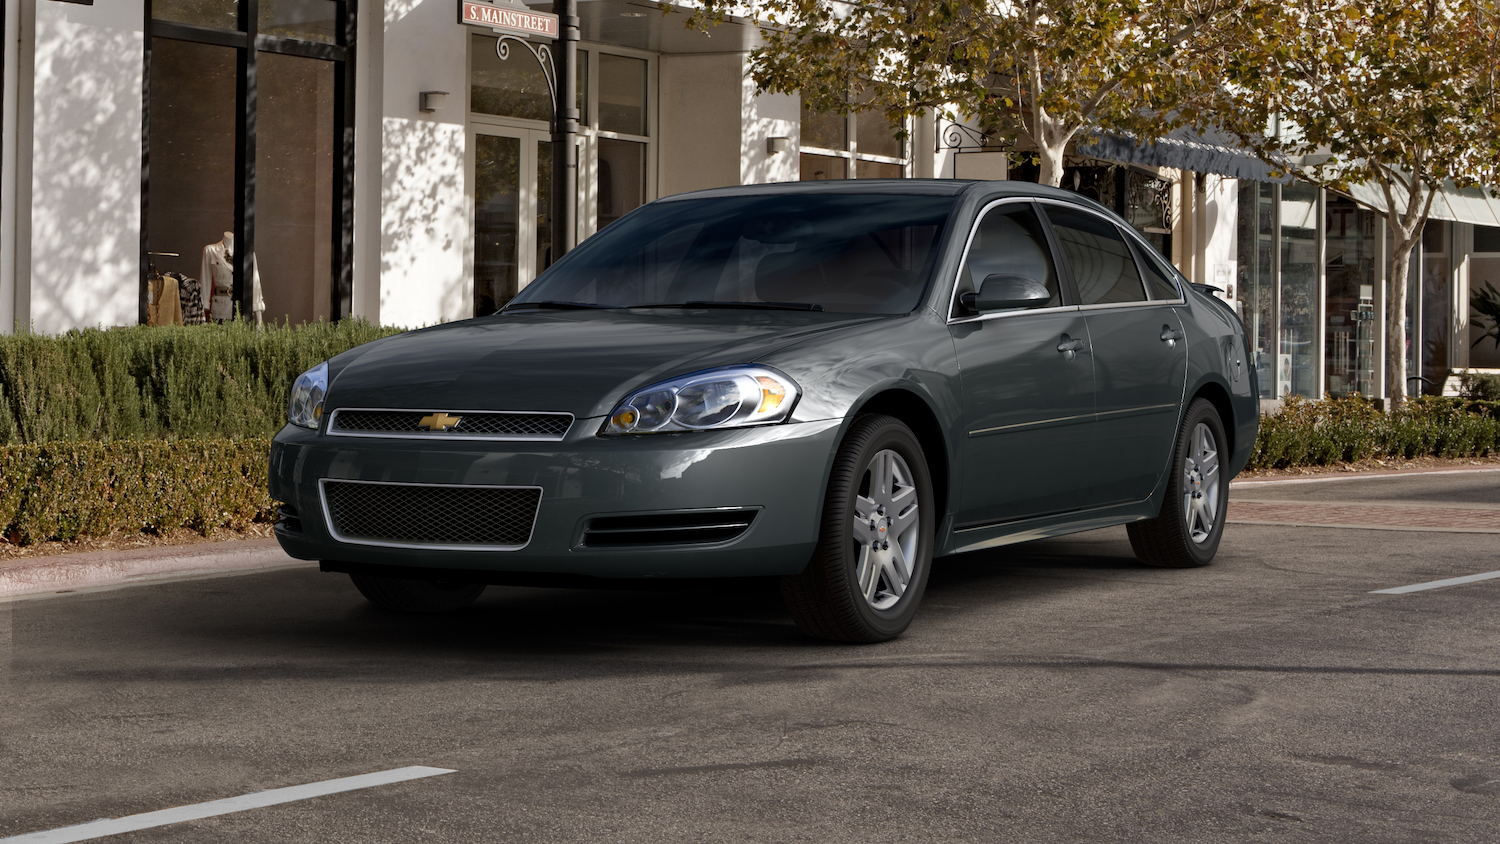 Dark gray Chevrolet Impala sedan parked on a tree-lined city street for a promo photo, a white building visible in the backgrond.